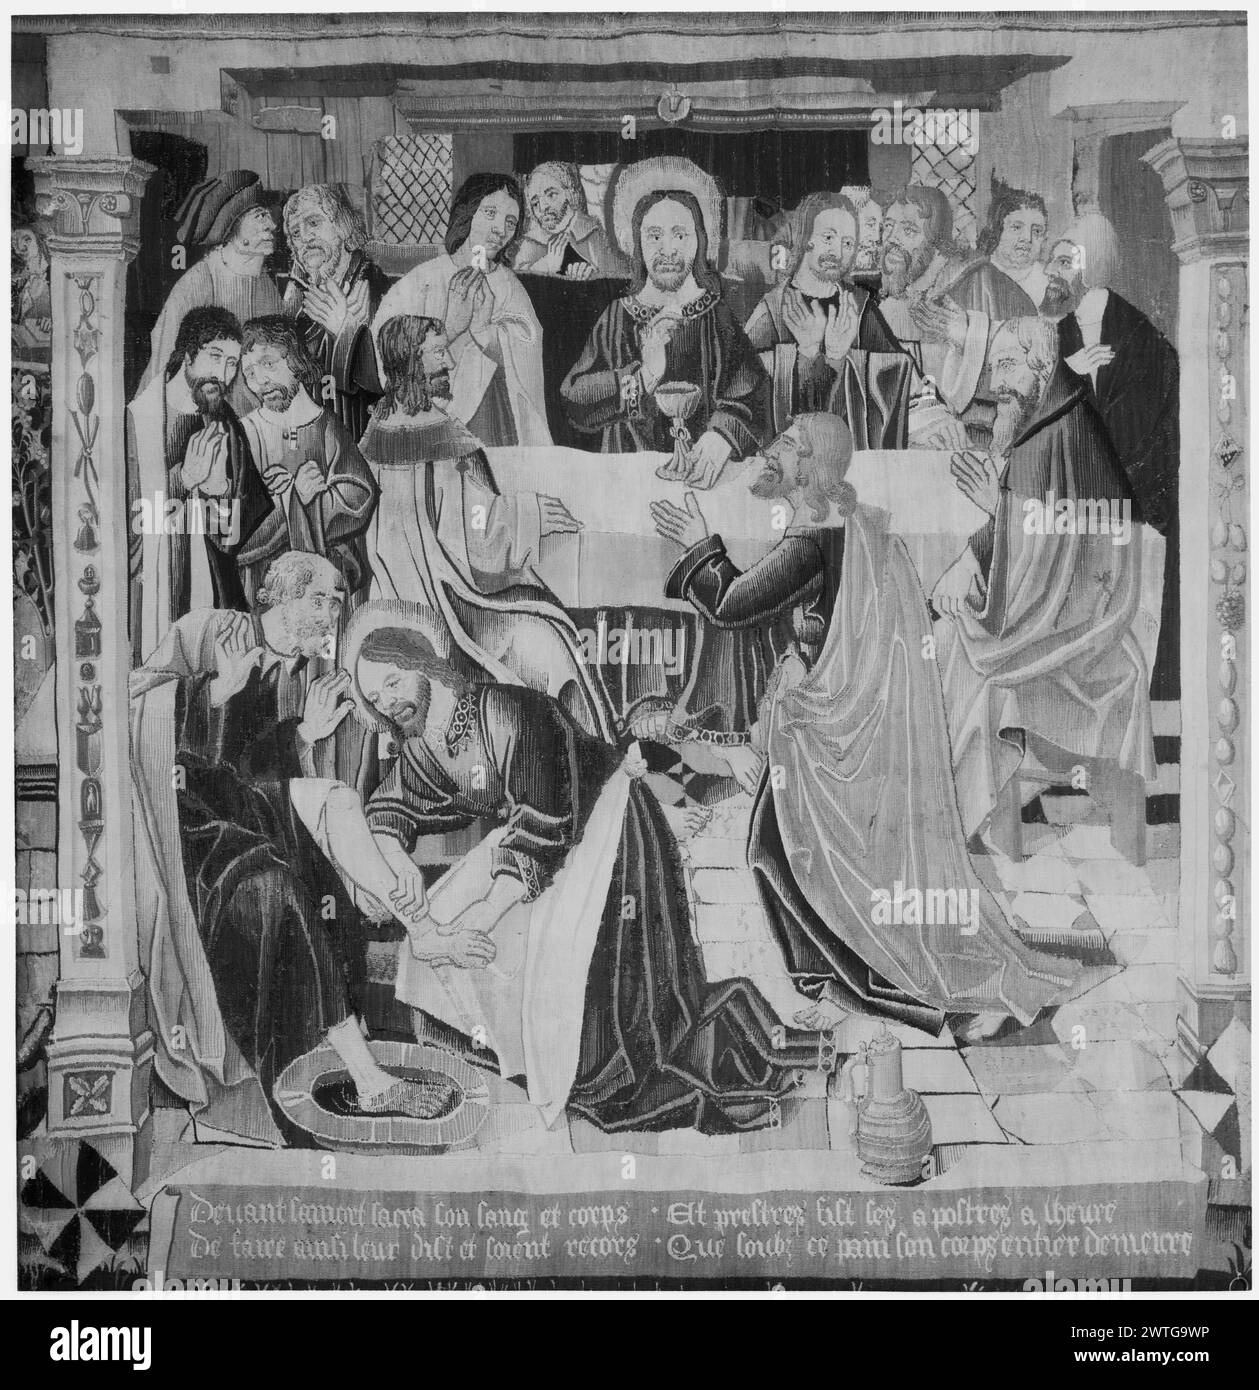 Passion of Christ: Last Supper (Institution of Eucharist). unknown c. 1500-1535 Tapestry Dimensions: H 7'8' x W 6'7' Tapestry Materials/Techniques: wool (undyed, warp: 6/cm); wool & silk (dyed, weft) Culture: Southern Netherlands Ownership History: Abbey of Notre-Dame-de-la-Charité, Ronceray at Angers (believed to be gift of Dame Loyse le Roux). Comtesse Walsh de Serrant, of Château Plessy-Macé near Anjou (1793 or 1850?); sold by Larcher de Coupigny 9/30-10/5/1880. M. Lévy coll., Paris. French & Co. purchased from Mrs. B. C. Fray [Jack Chrysler crossed out] 9/26/1940 [also lists: 1/15/1941]. H Stock Photo